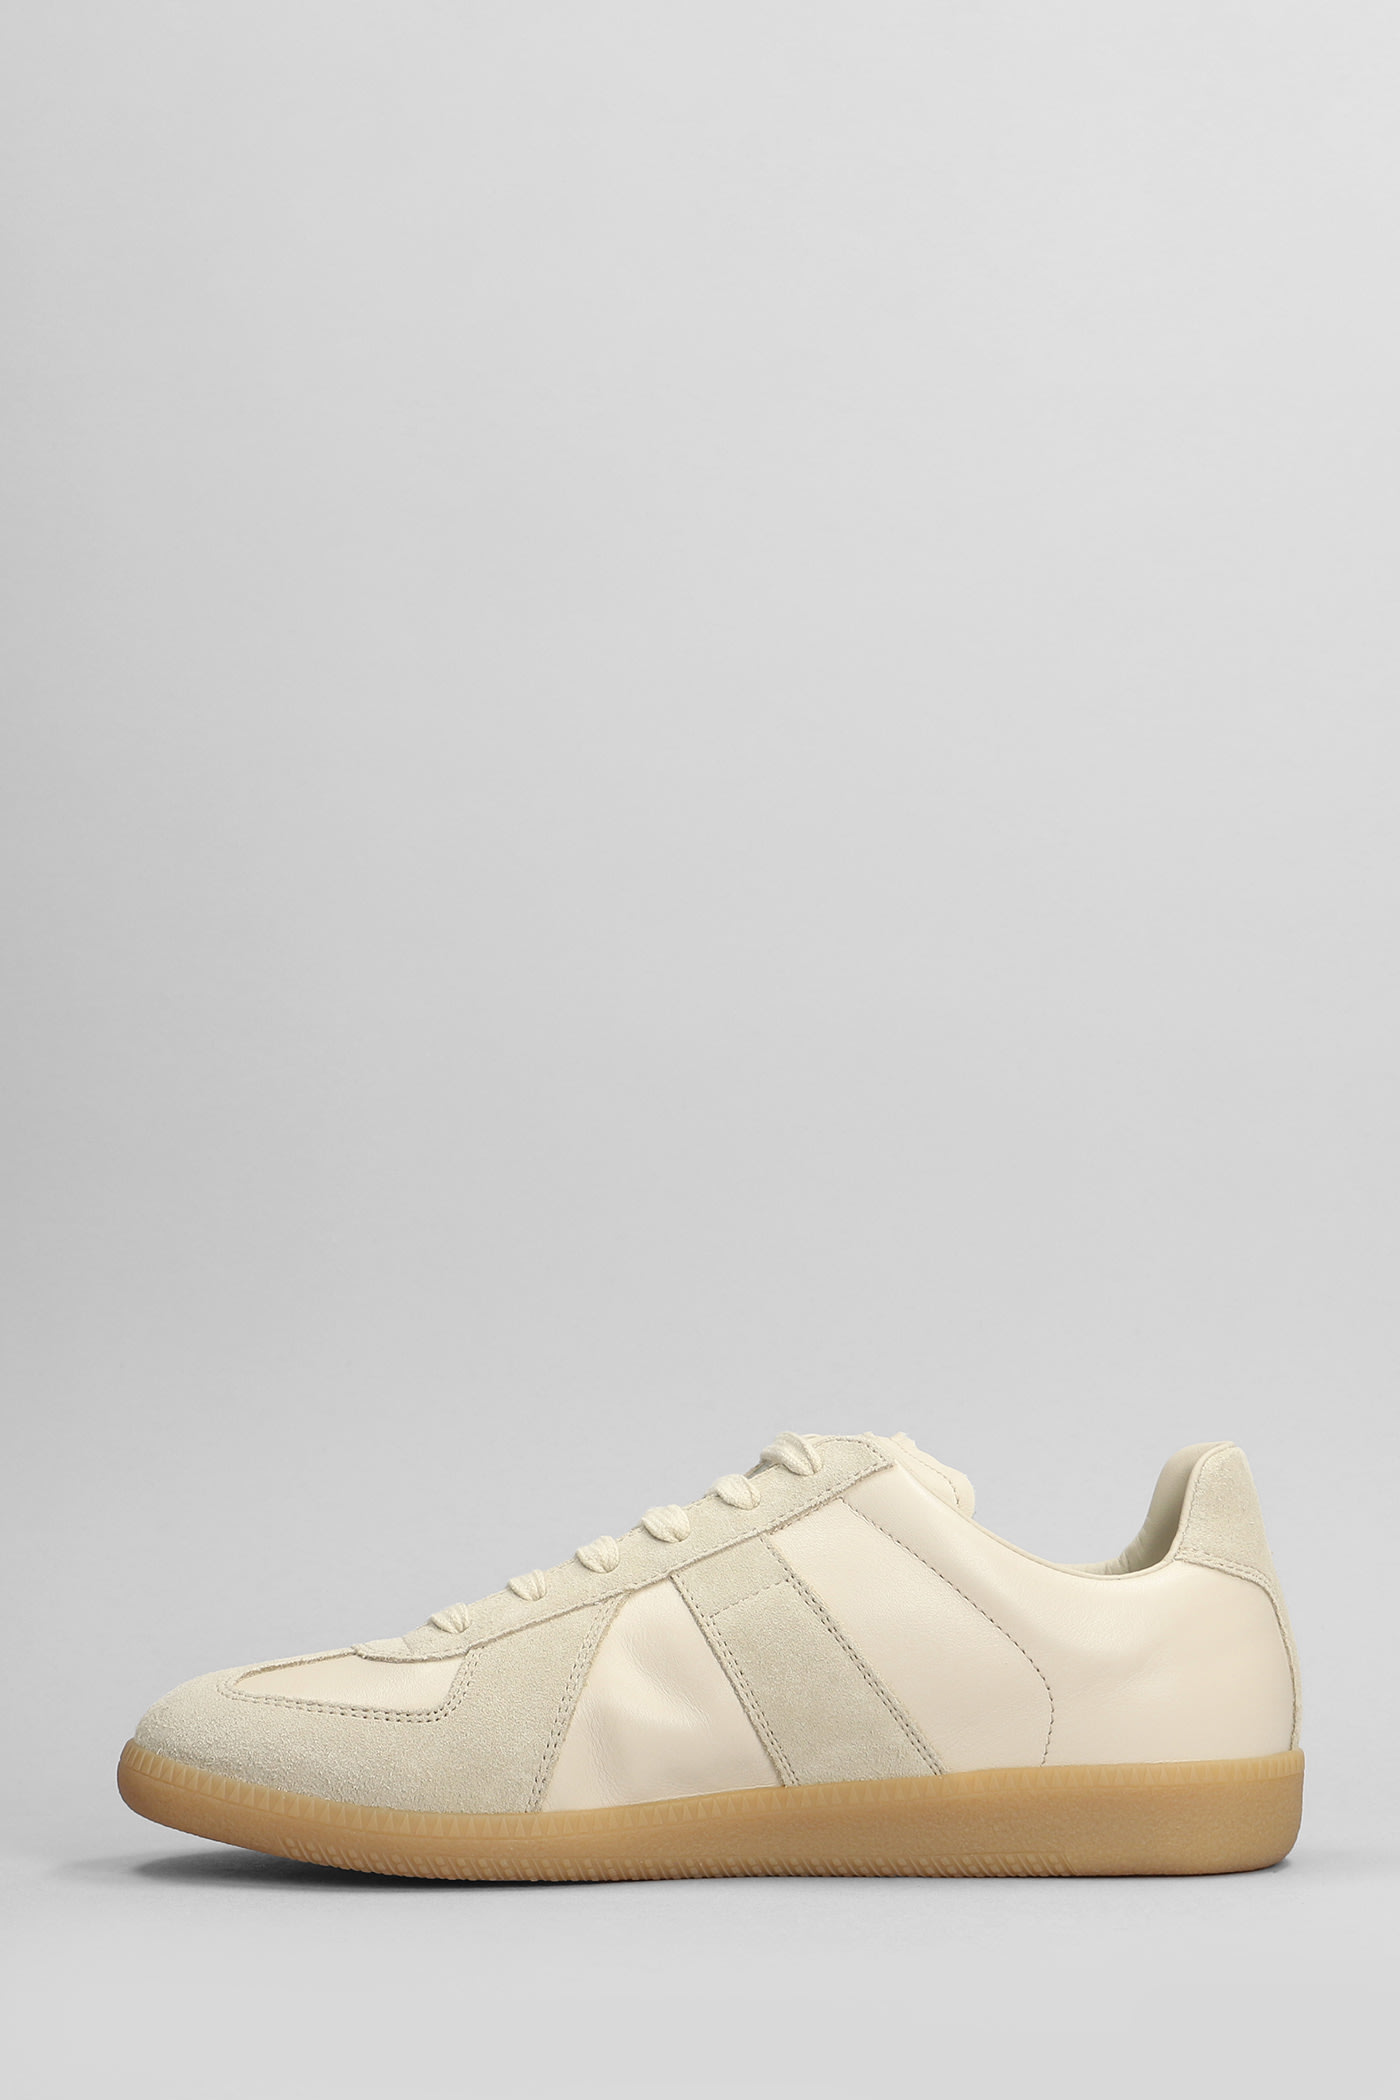 Shop Maison Margiela Replica Sneakers In Beige Suede And Leather